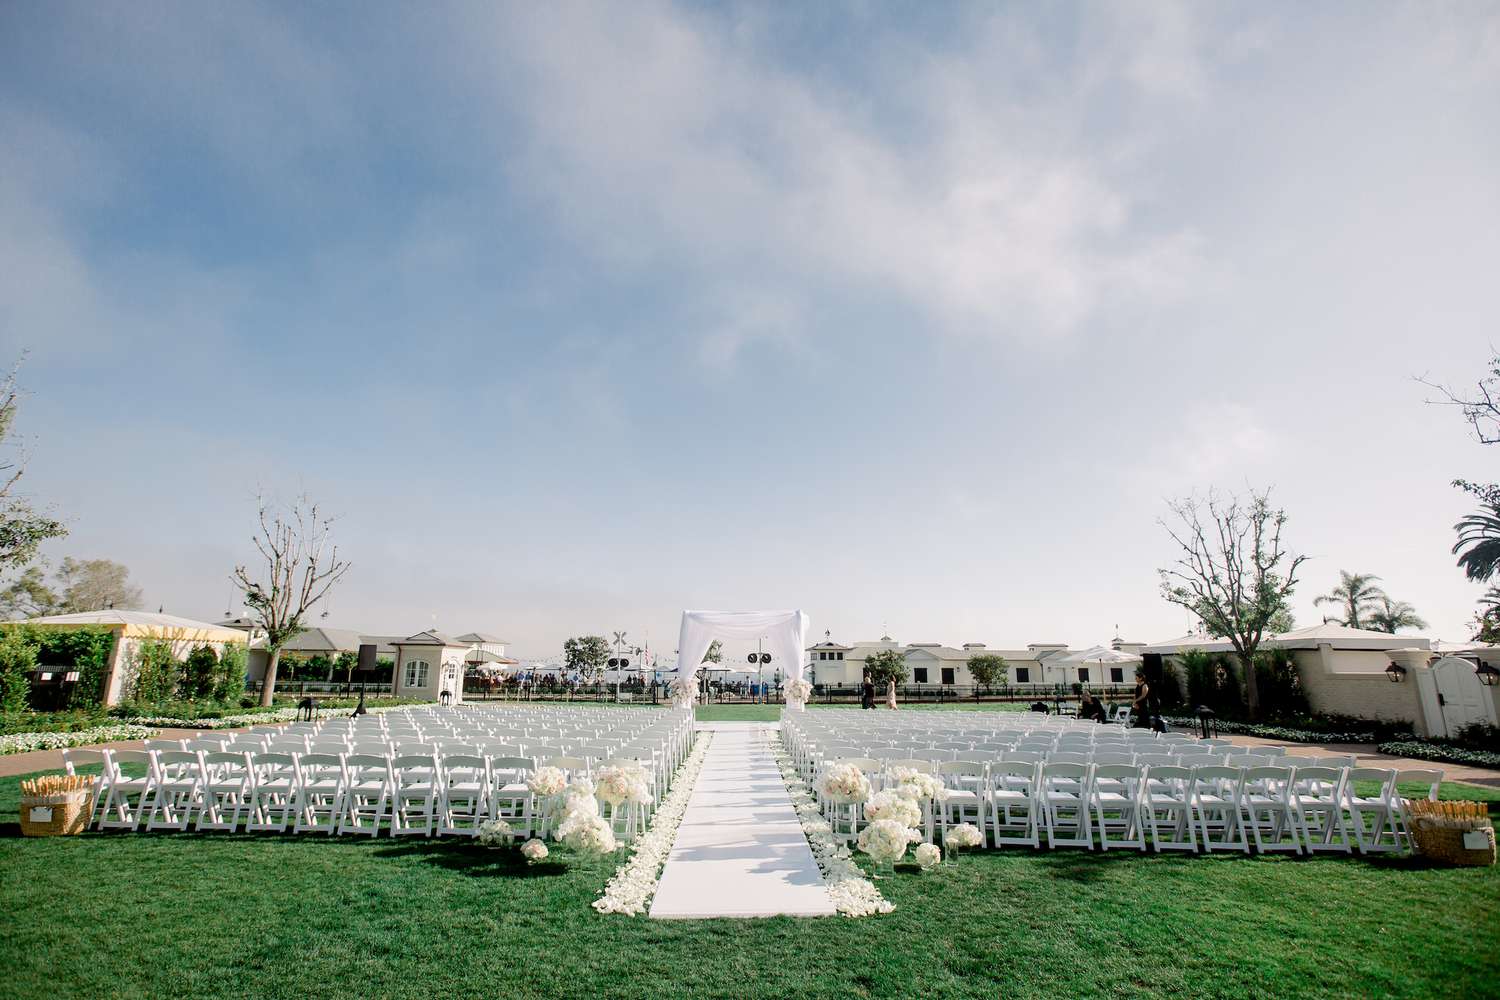 Backyard ceremony with white runner, white petals lining the aisle, and varying heights of glass vases filled with white flowers at the start